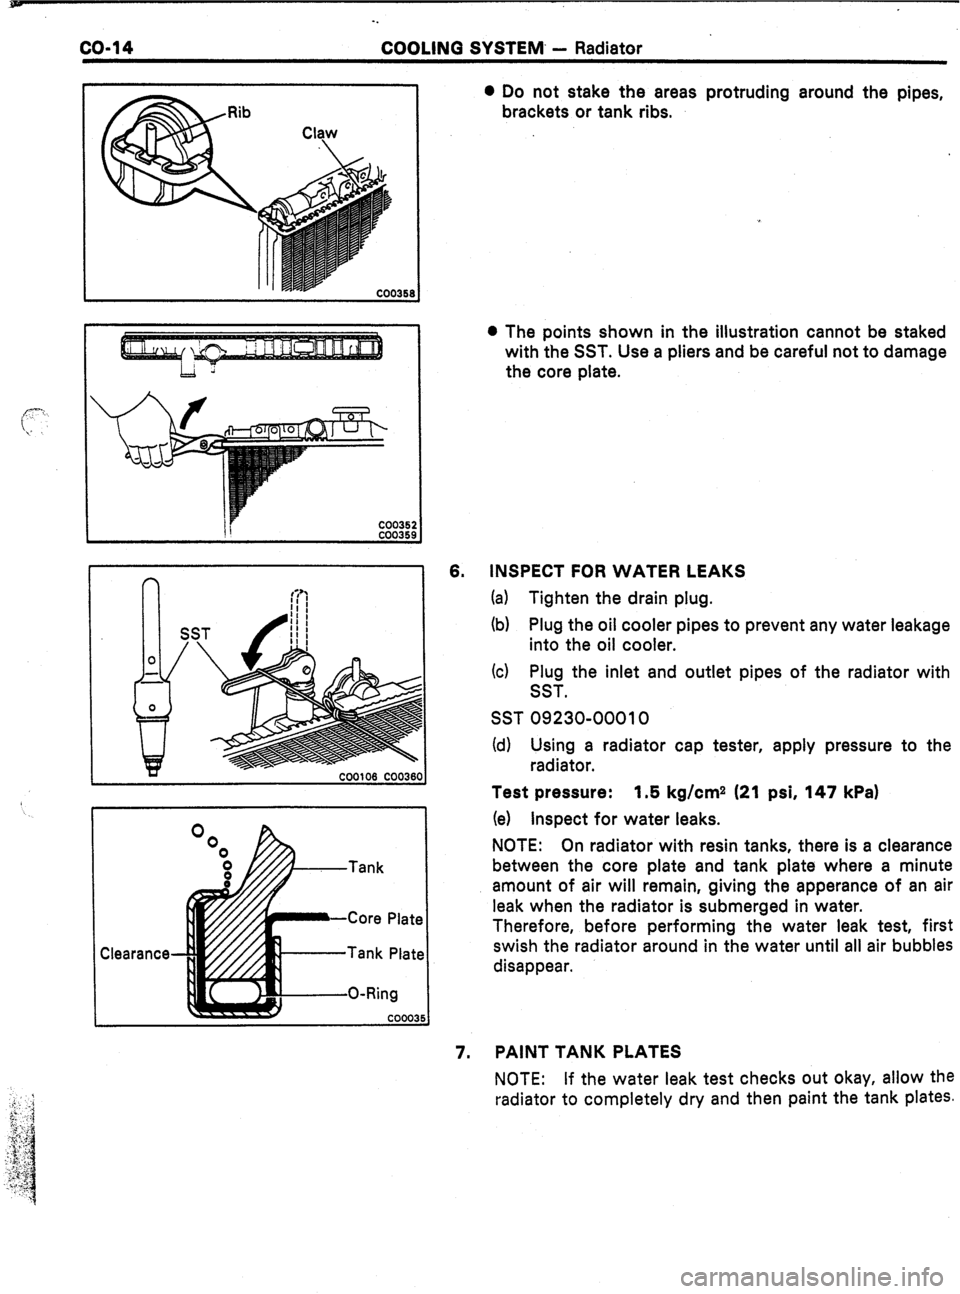 TOYOTA CELICA 1987  Service Repair Manual co-14 
-. 
COOLINQ SYSTEM. - Radiator 
Tank Plate 
O-Ring 6. 0 Do not stake the areas protruding around the pipes, 
brackets or tank ribs. 
l The points shown in the illustration cannot be staked 
wit